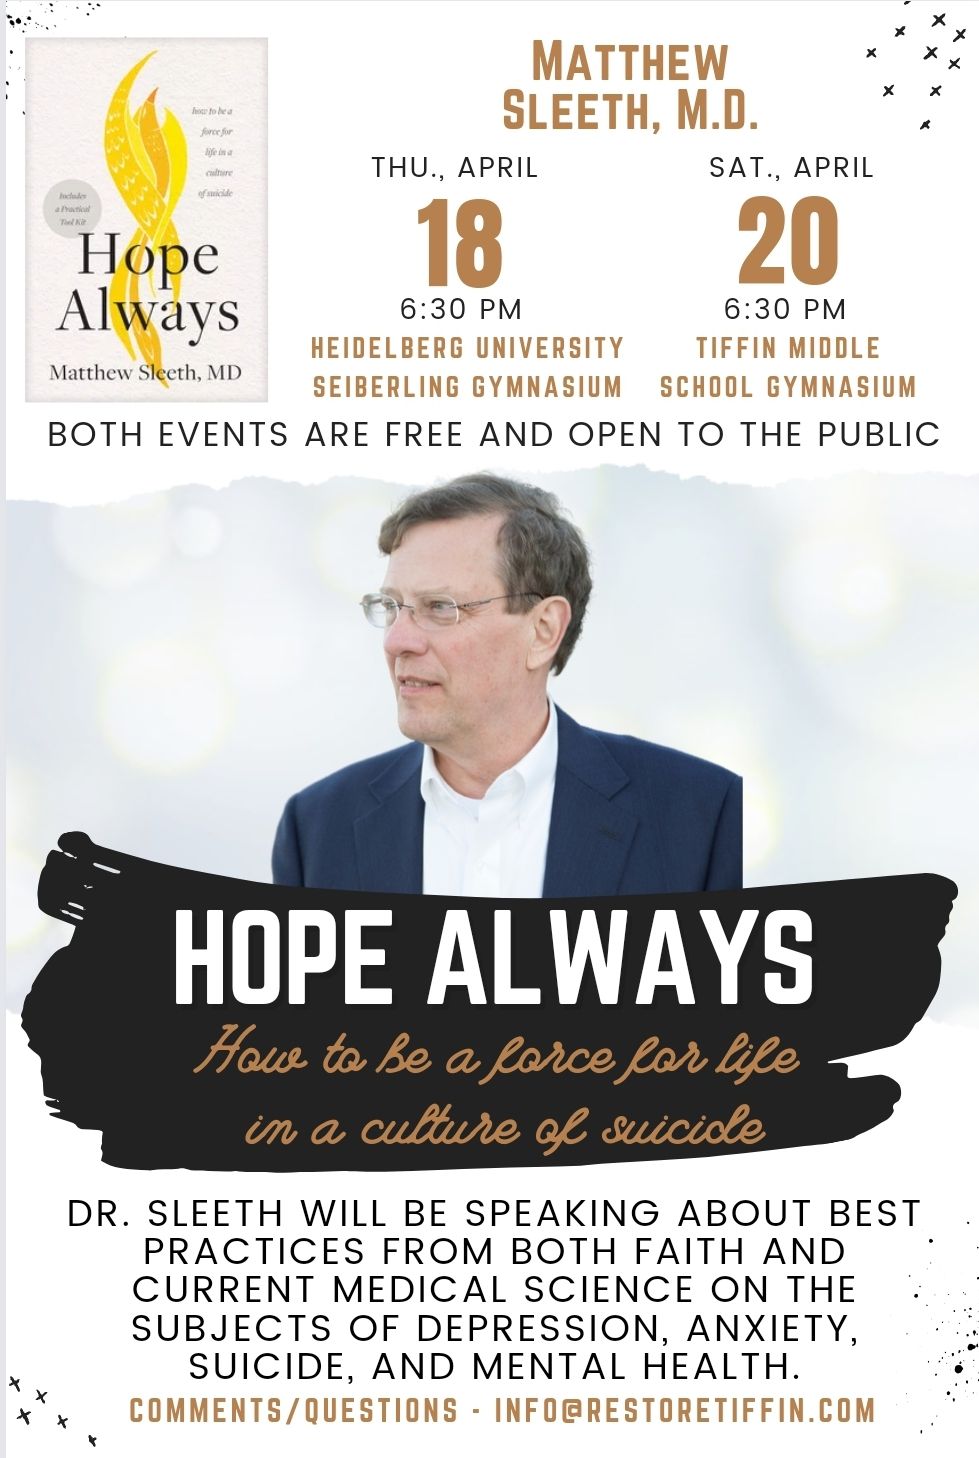 Hope Always: How to be a force for life in a culture of suicide